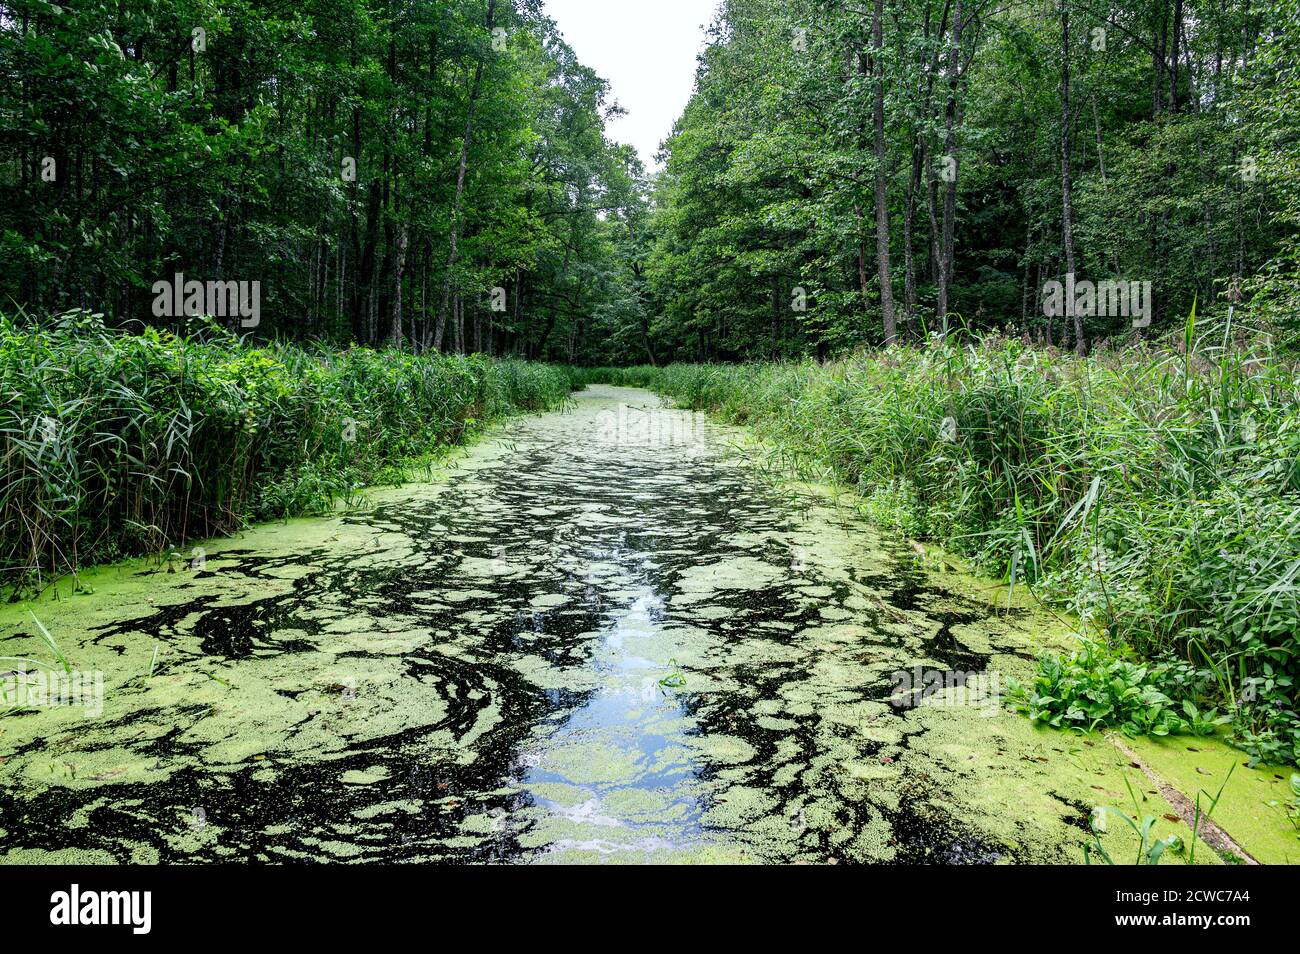 River covered in green seaweed in the middle of the forest. Stock Photo